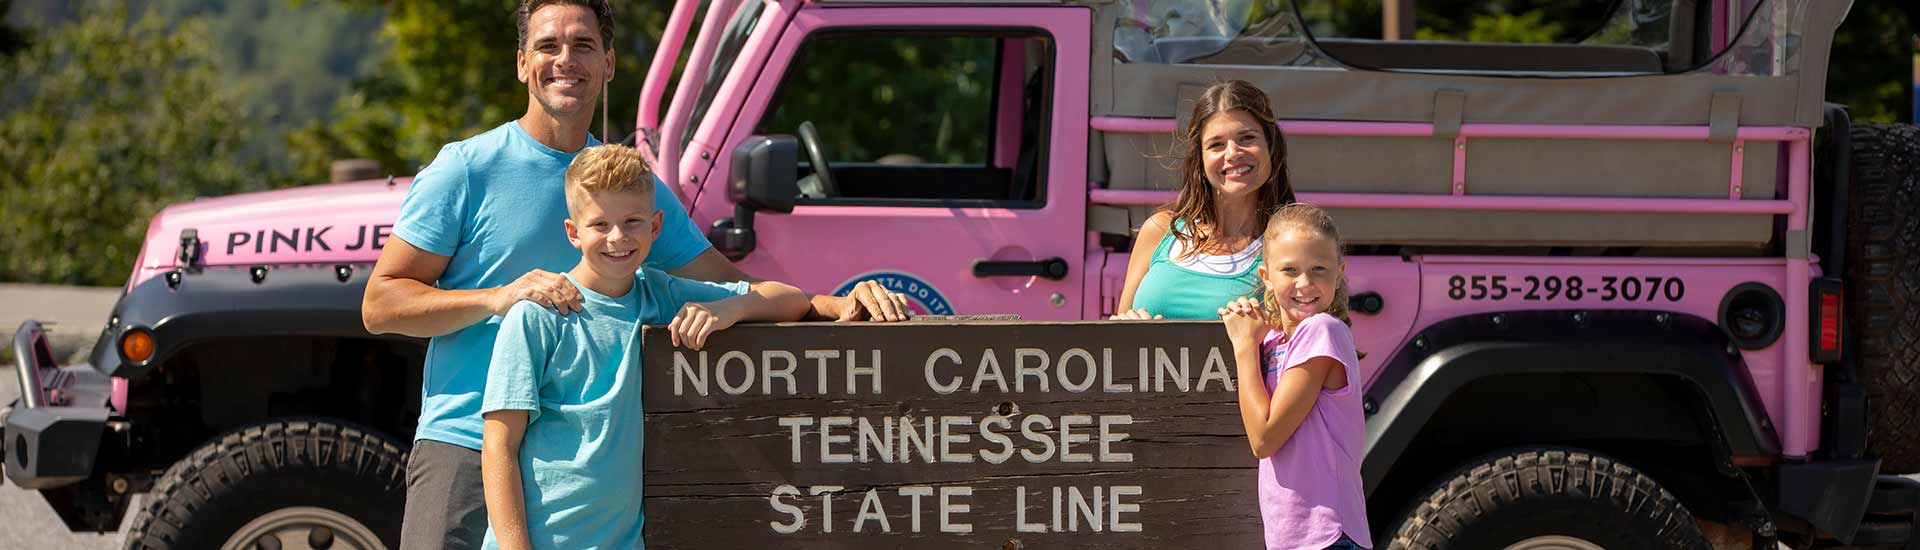 Family of four on Pink Jeep Newfound Gap tour posing at North Carolina-Tennessee state line sign, GSMNP